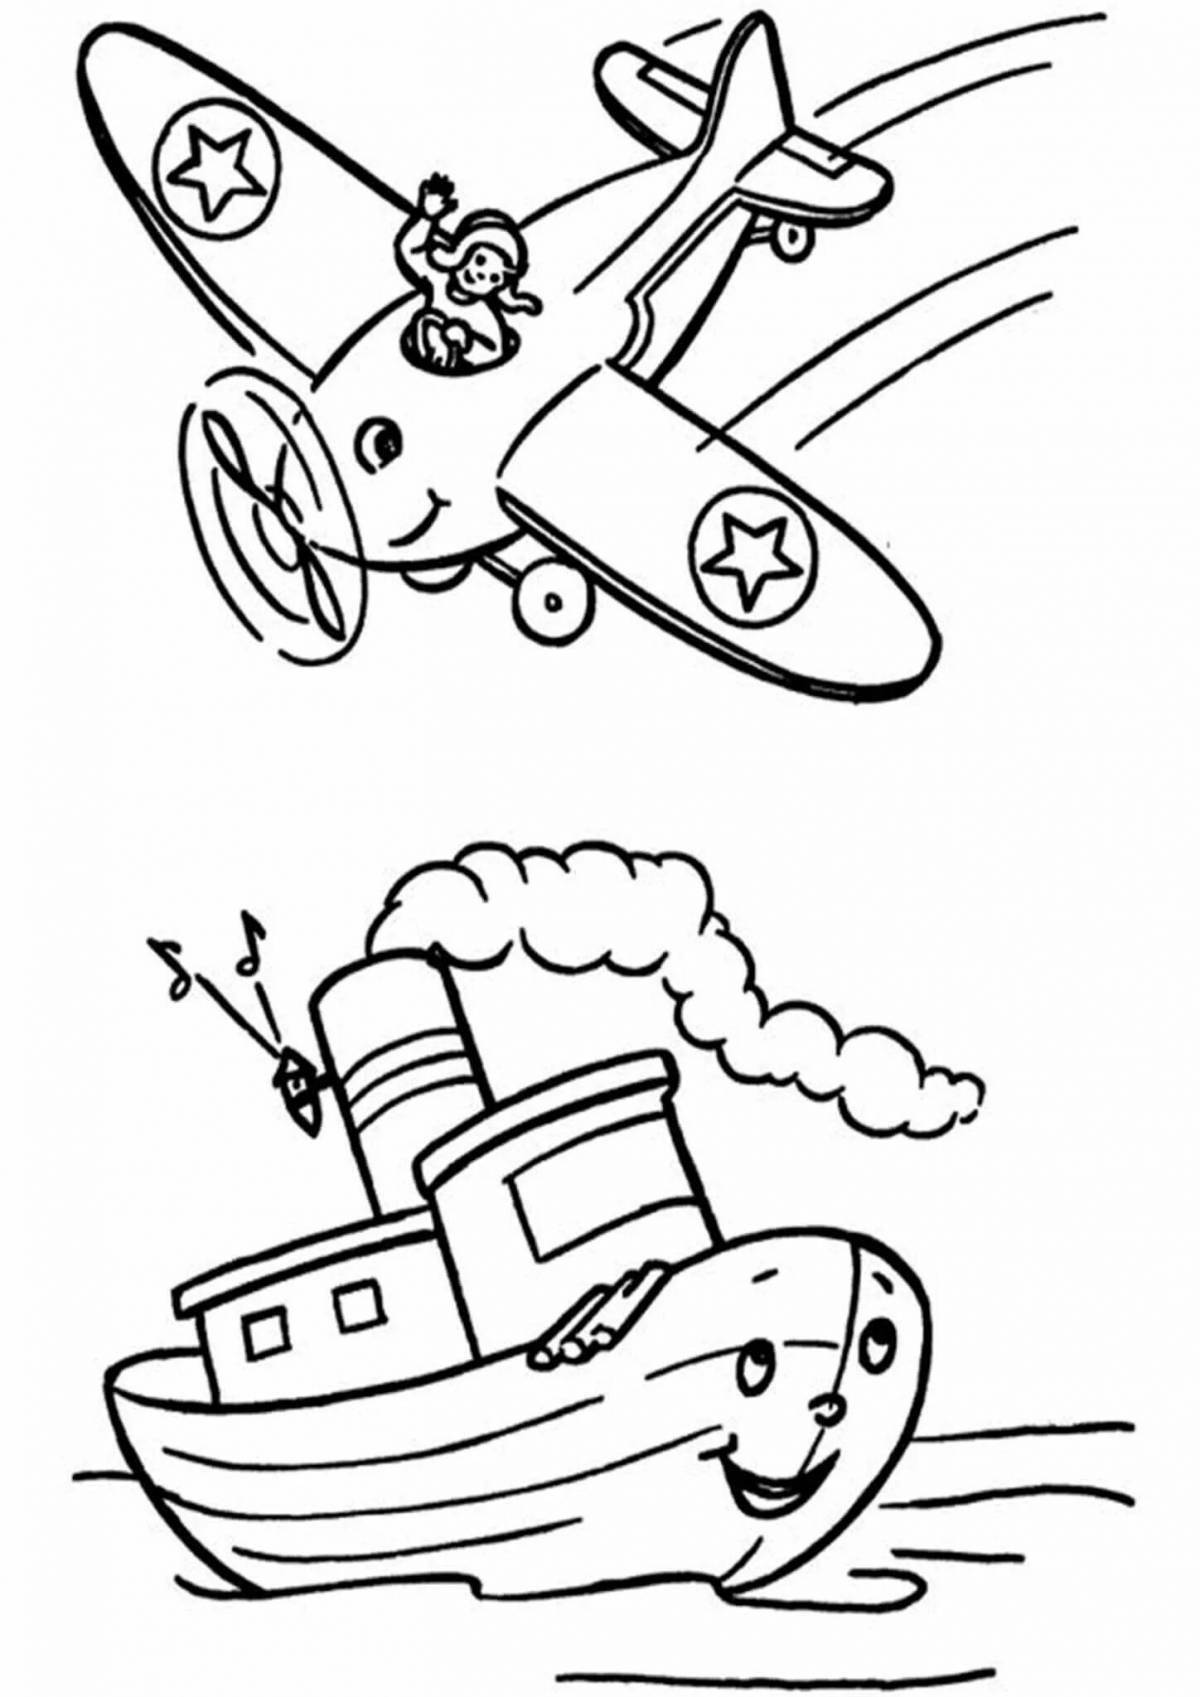 Awesome military vehicle coloring page for preschoolers